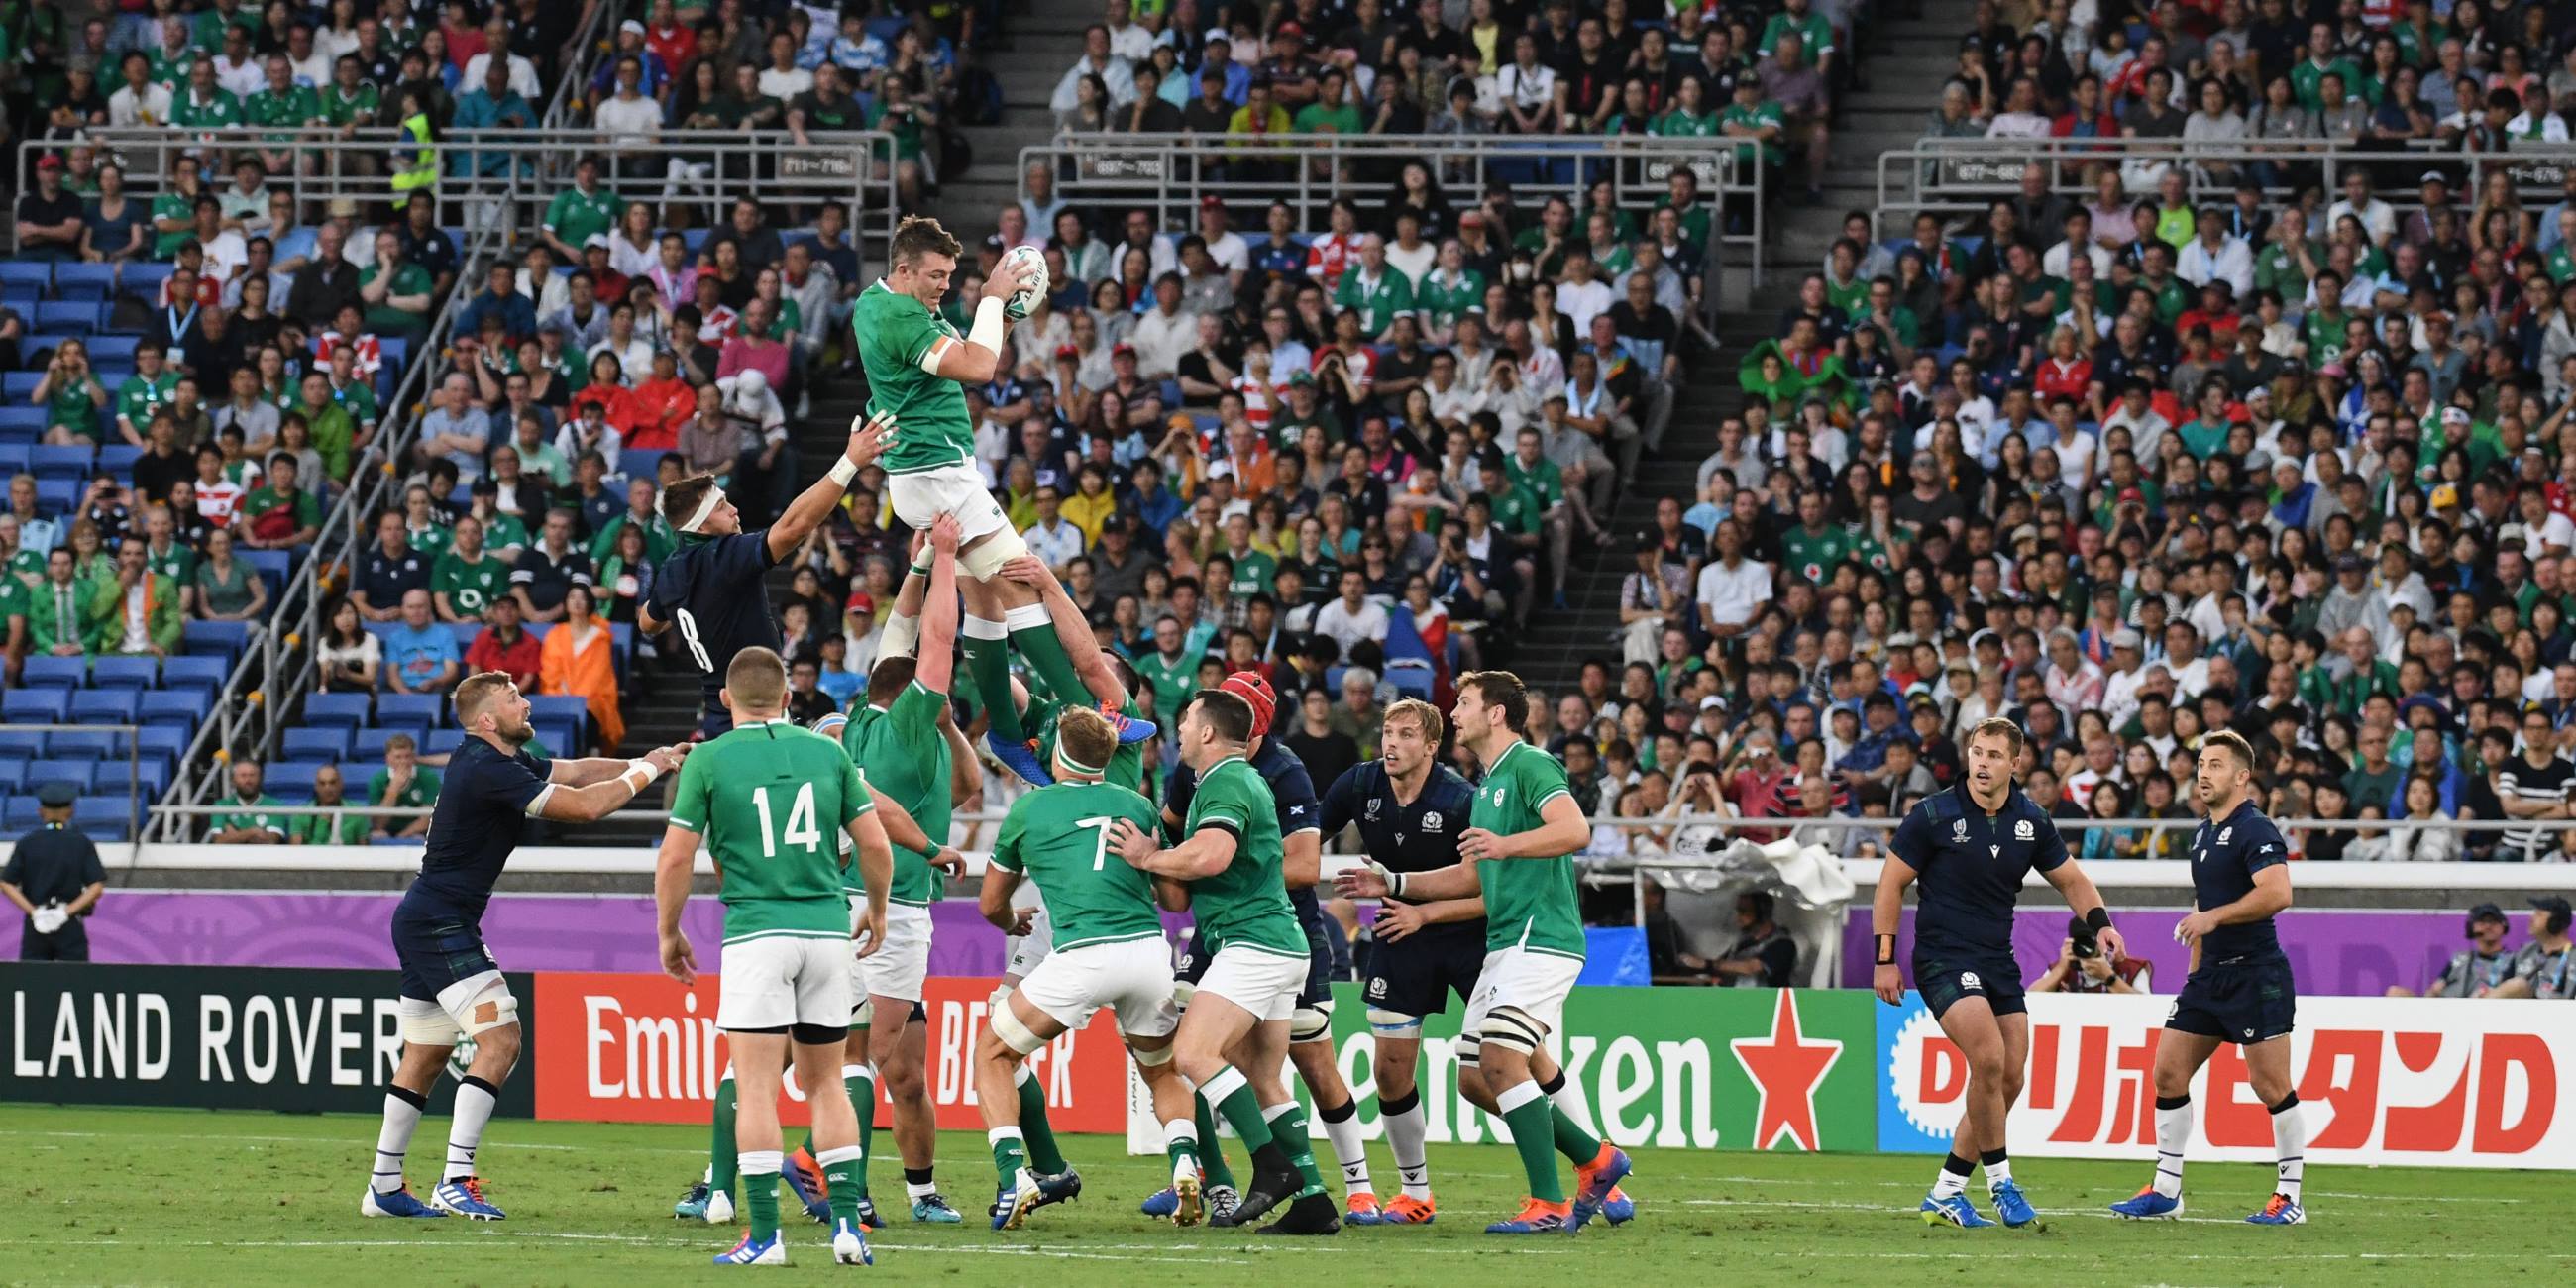 Ireland-rugby-players- jump-for-ball-trying-to- get-to-Rugby-World-Cup-Final – All Eyes on Yokohama